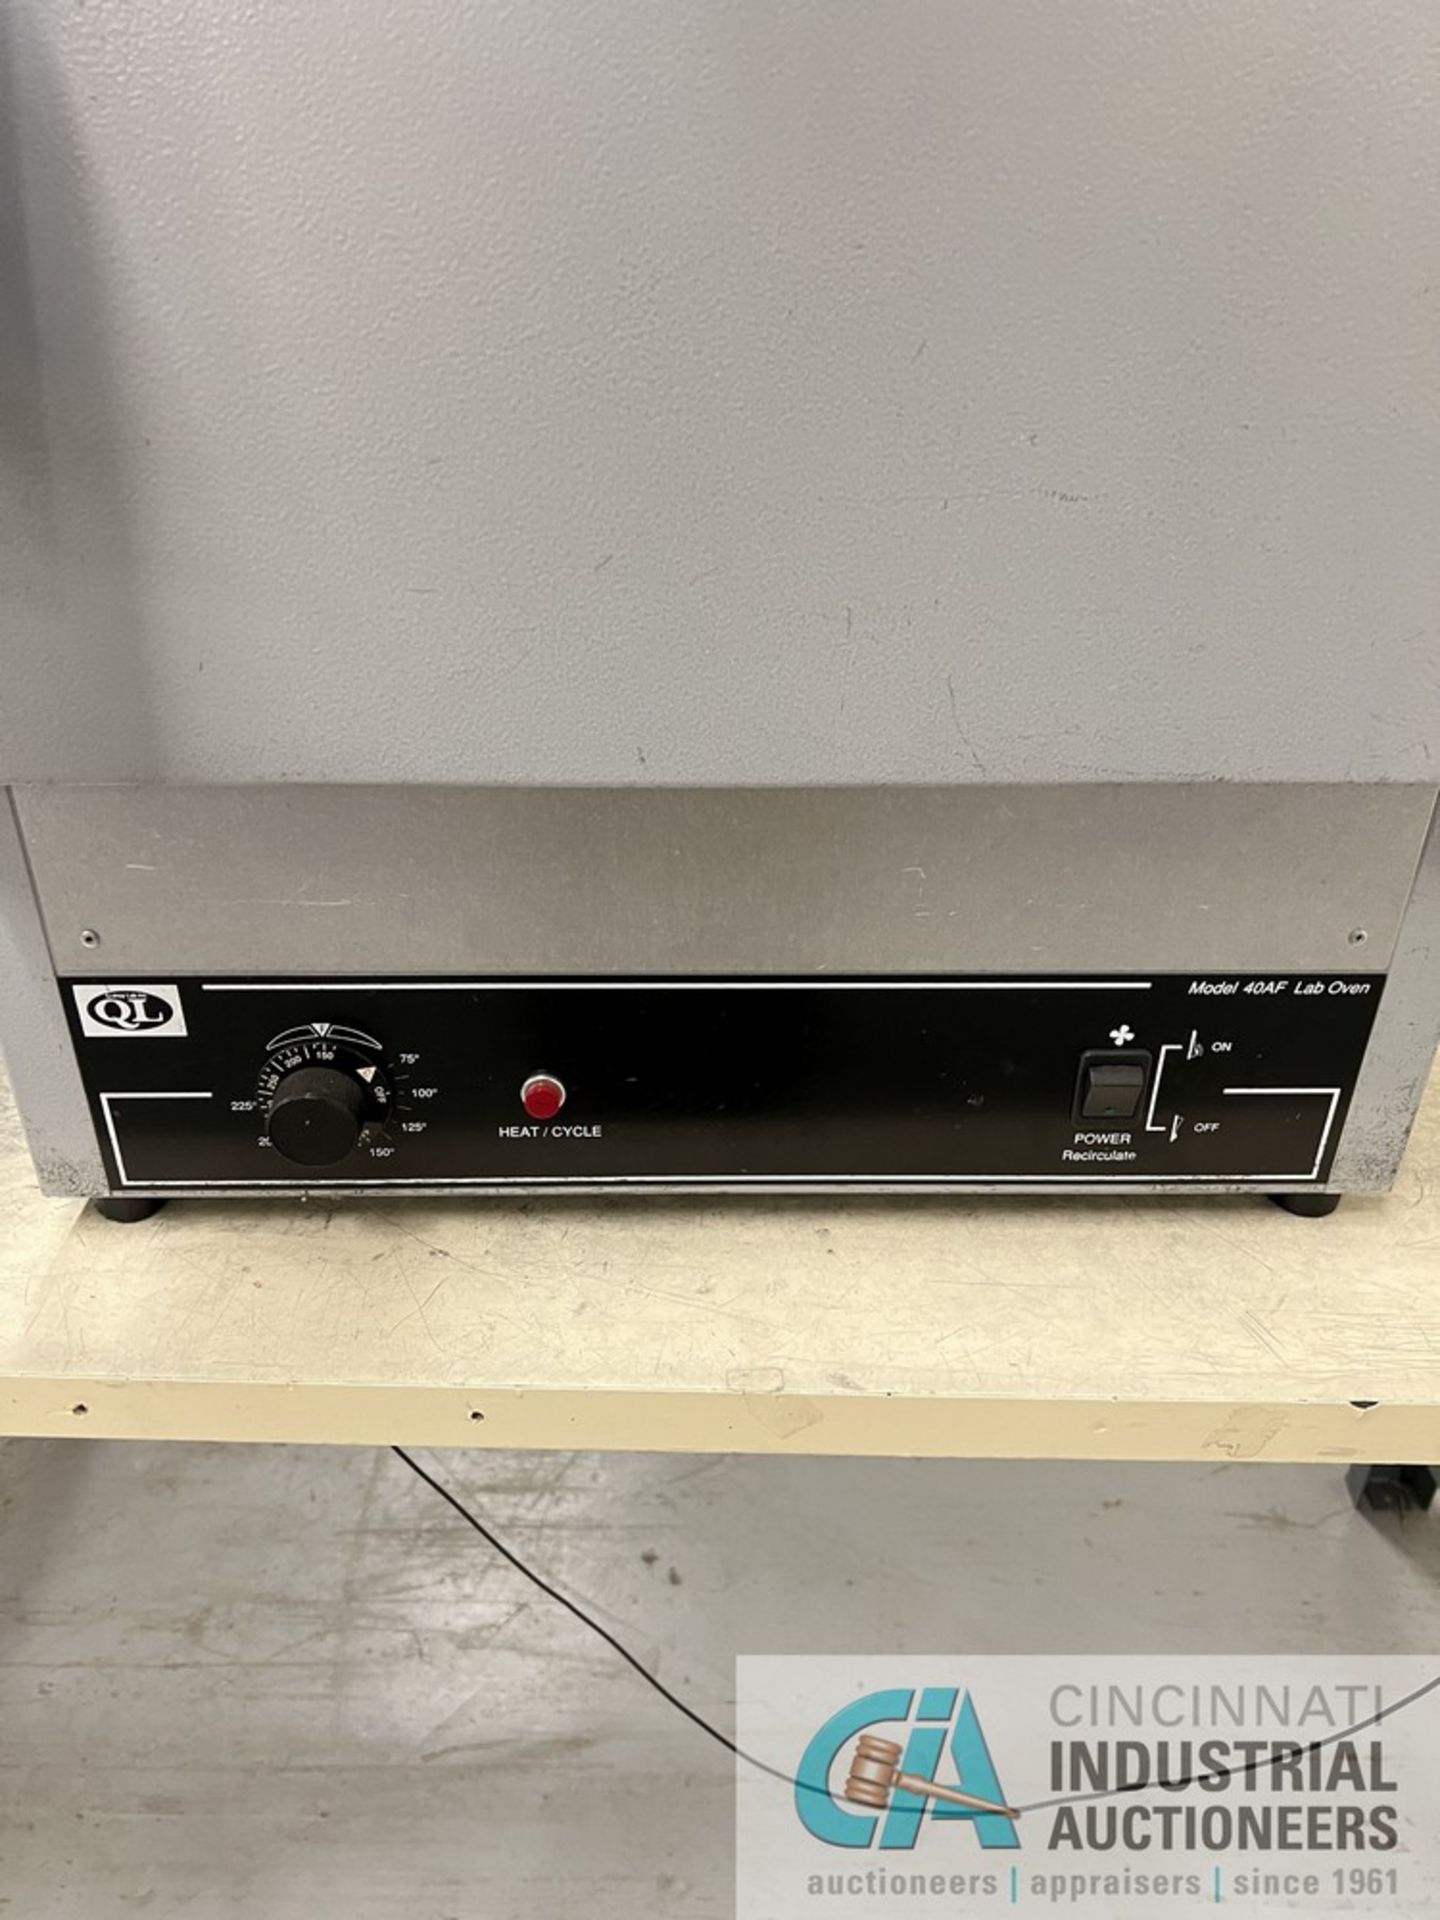 QUINCY LAB MODEL 40AF CONVECTION OVEN; S/N A4-2772 (WAREHOUSE) - Image 2 of 5